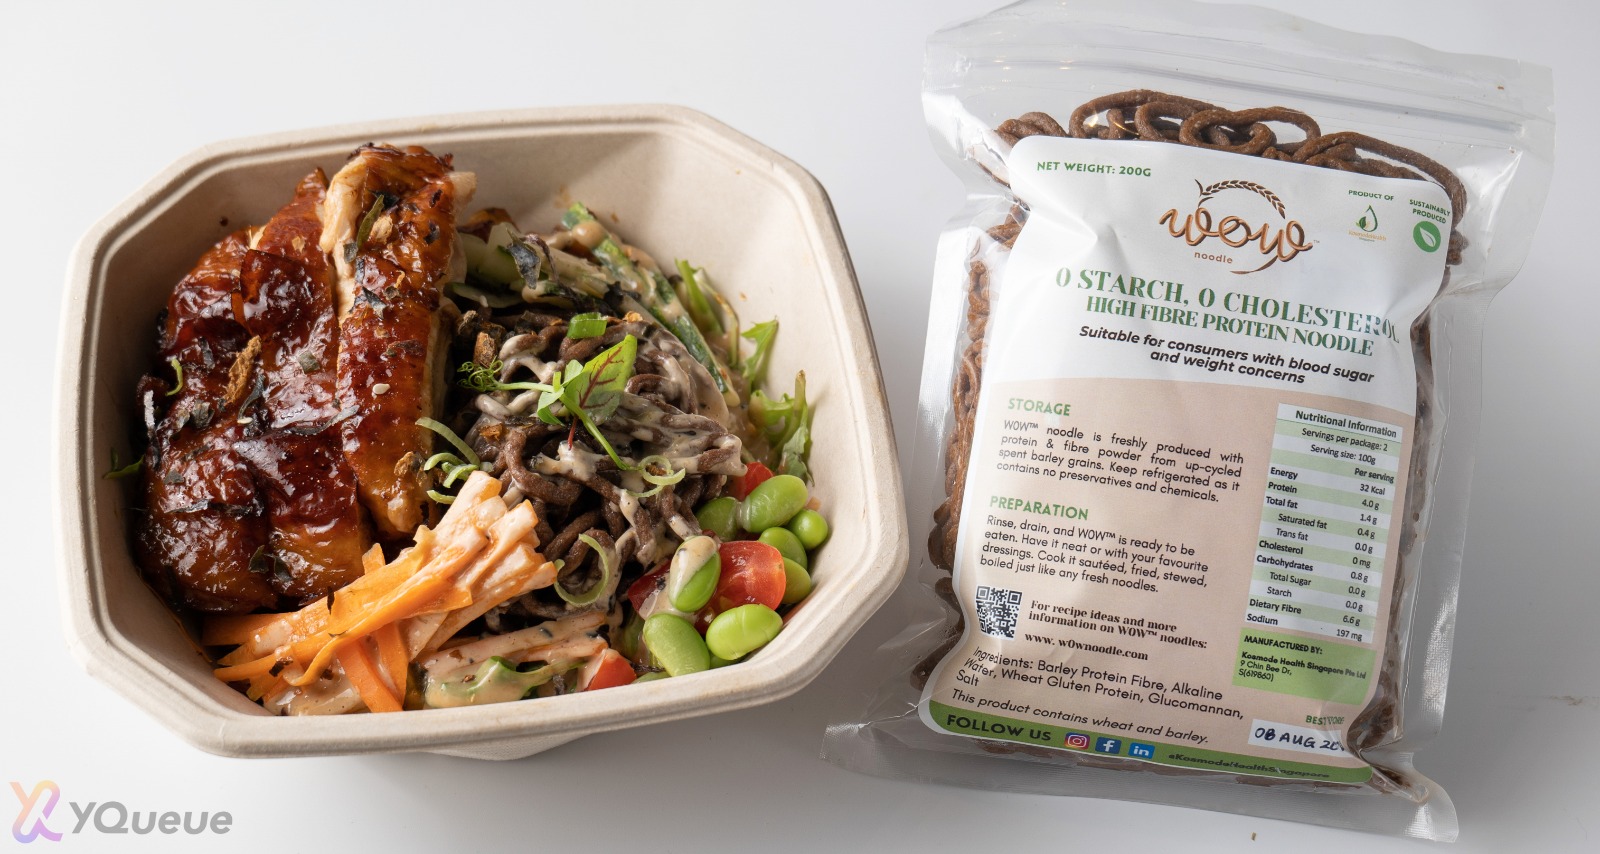 w0w(R) soba retail pack and salad